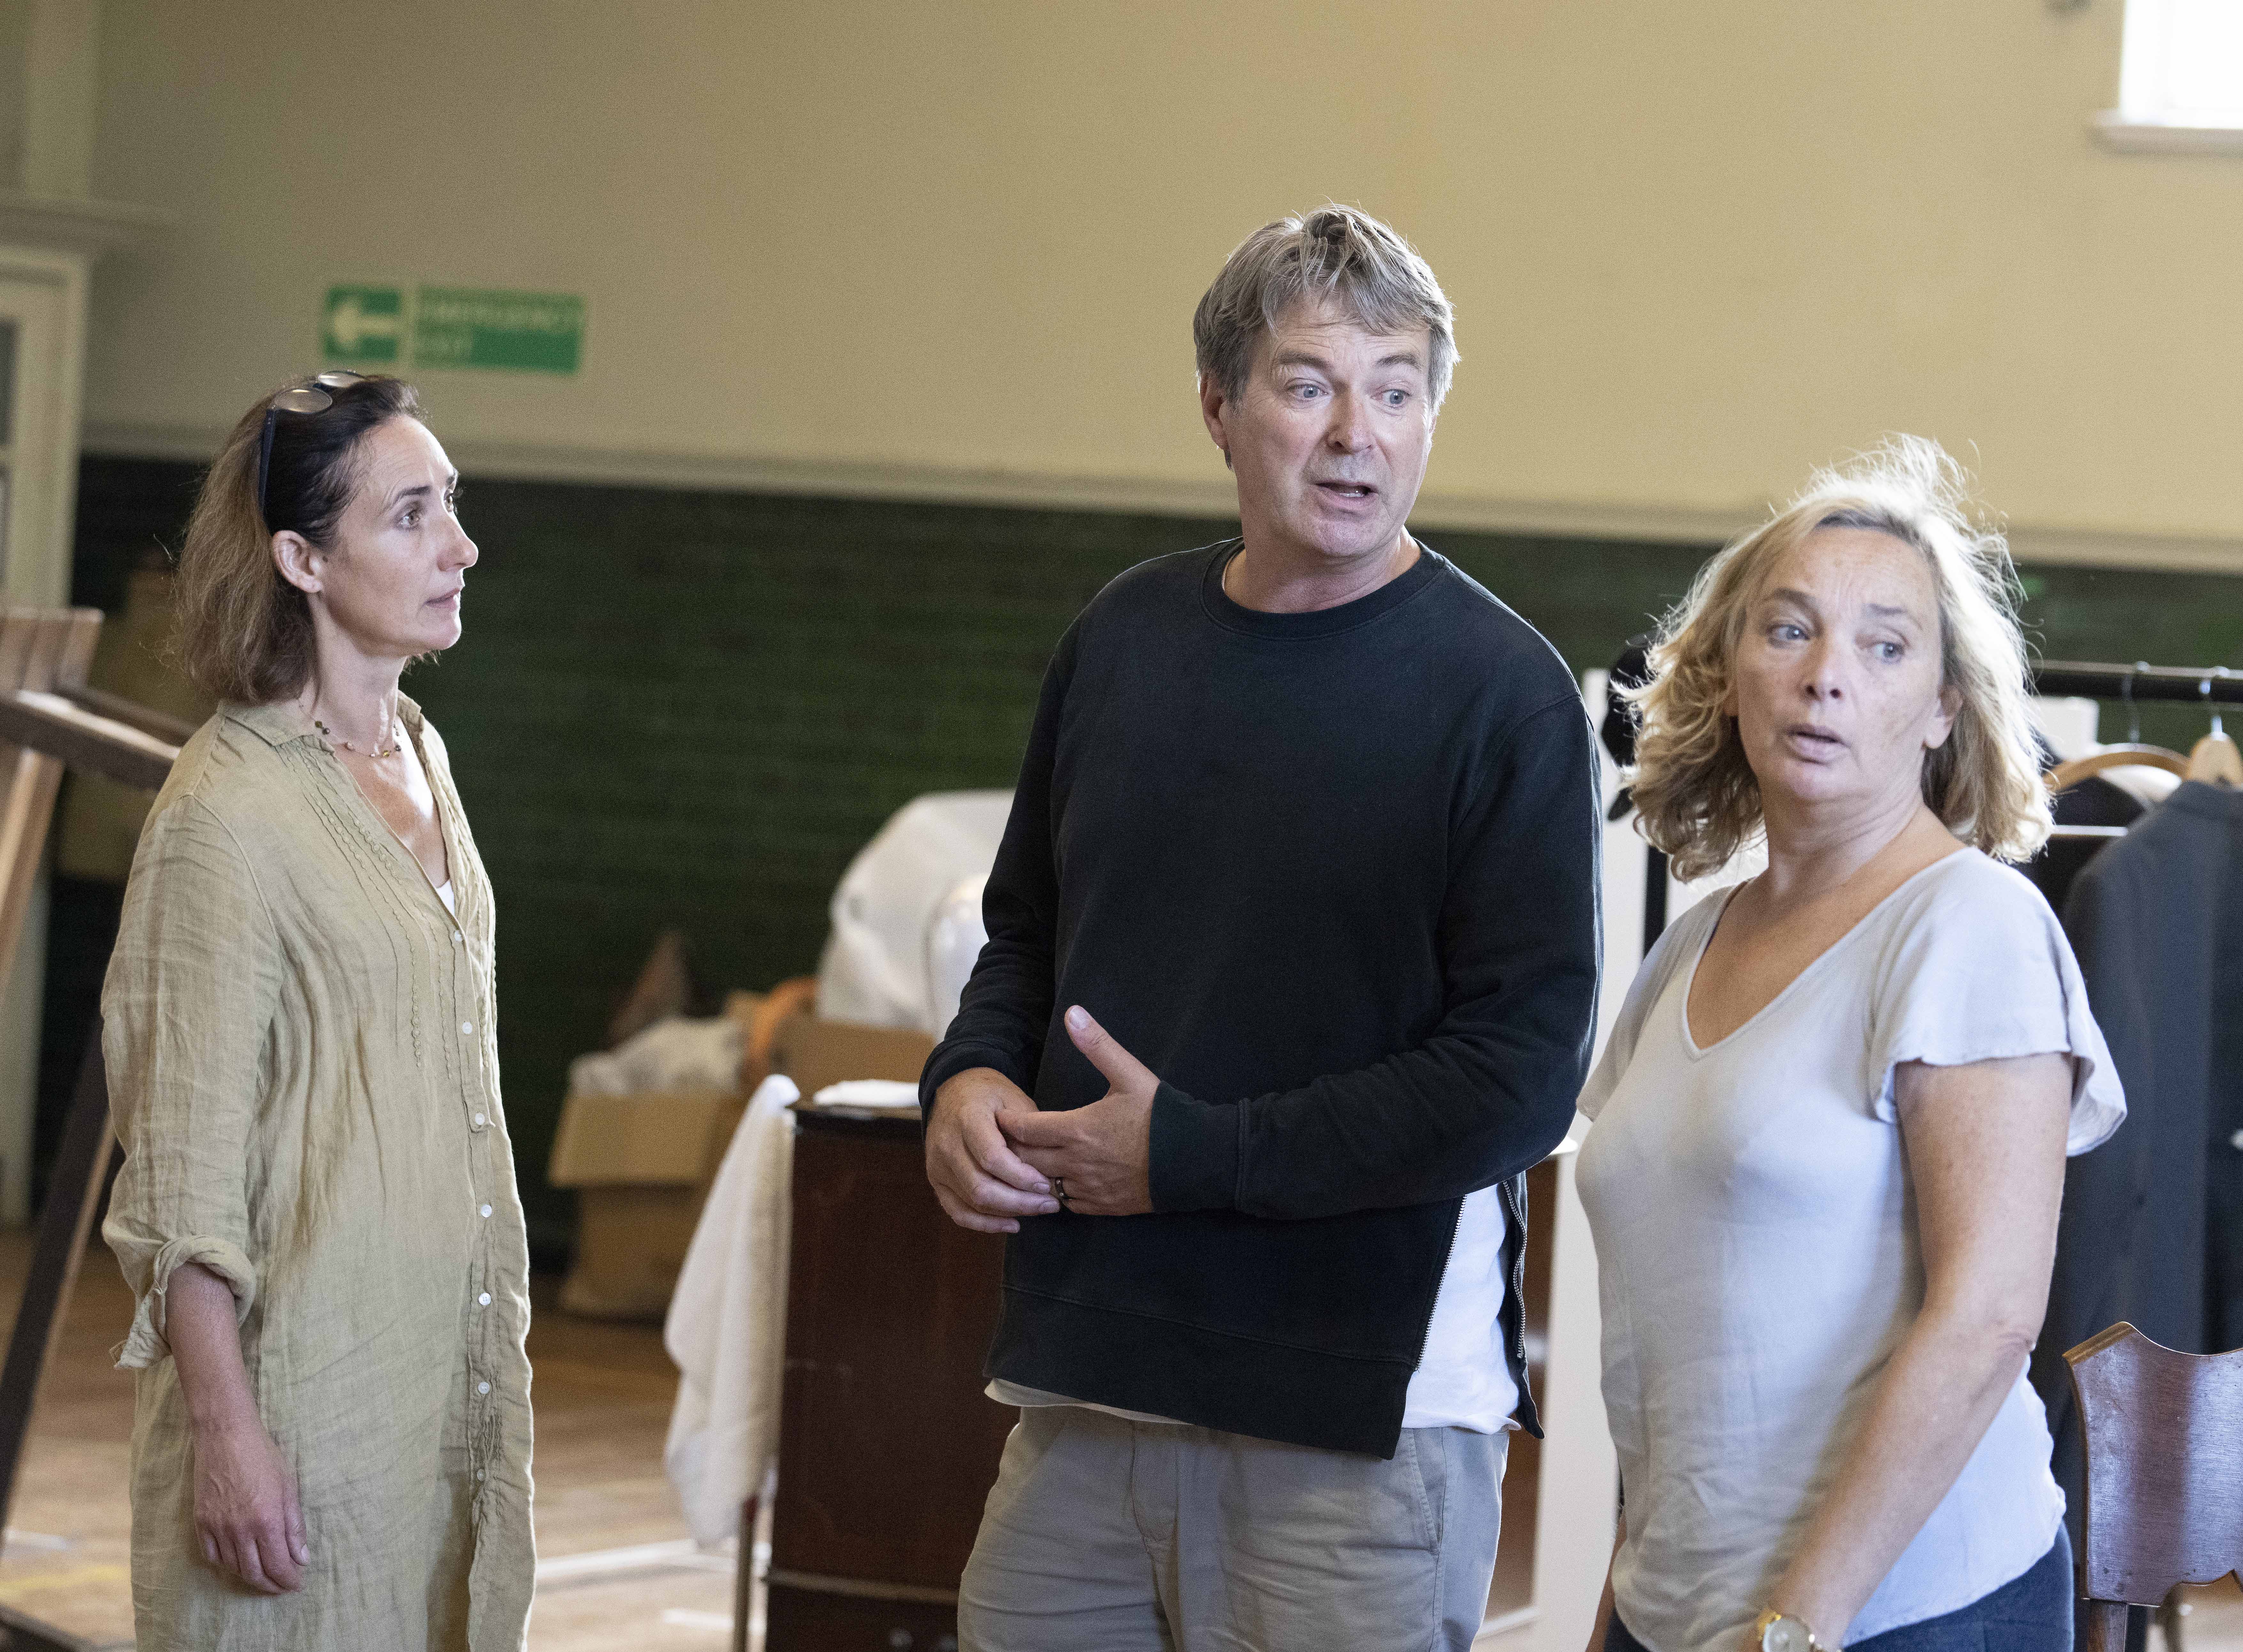 Julian Clary and other cast members rehearsing The Dresser at Malvern Theatres 